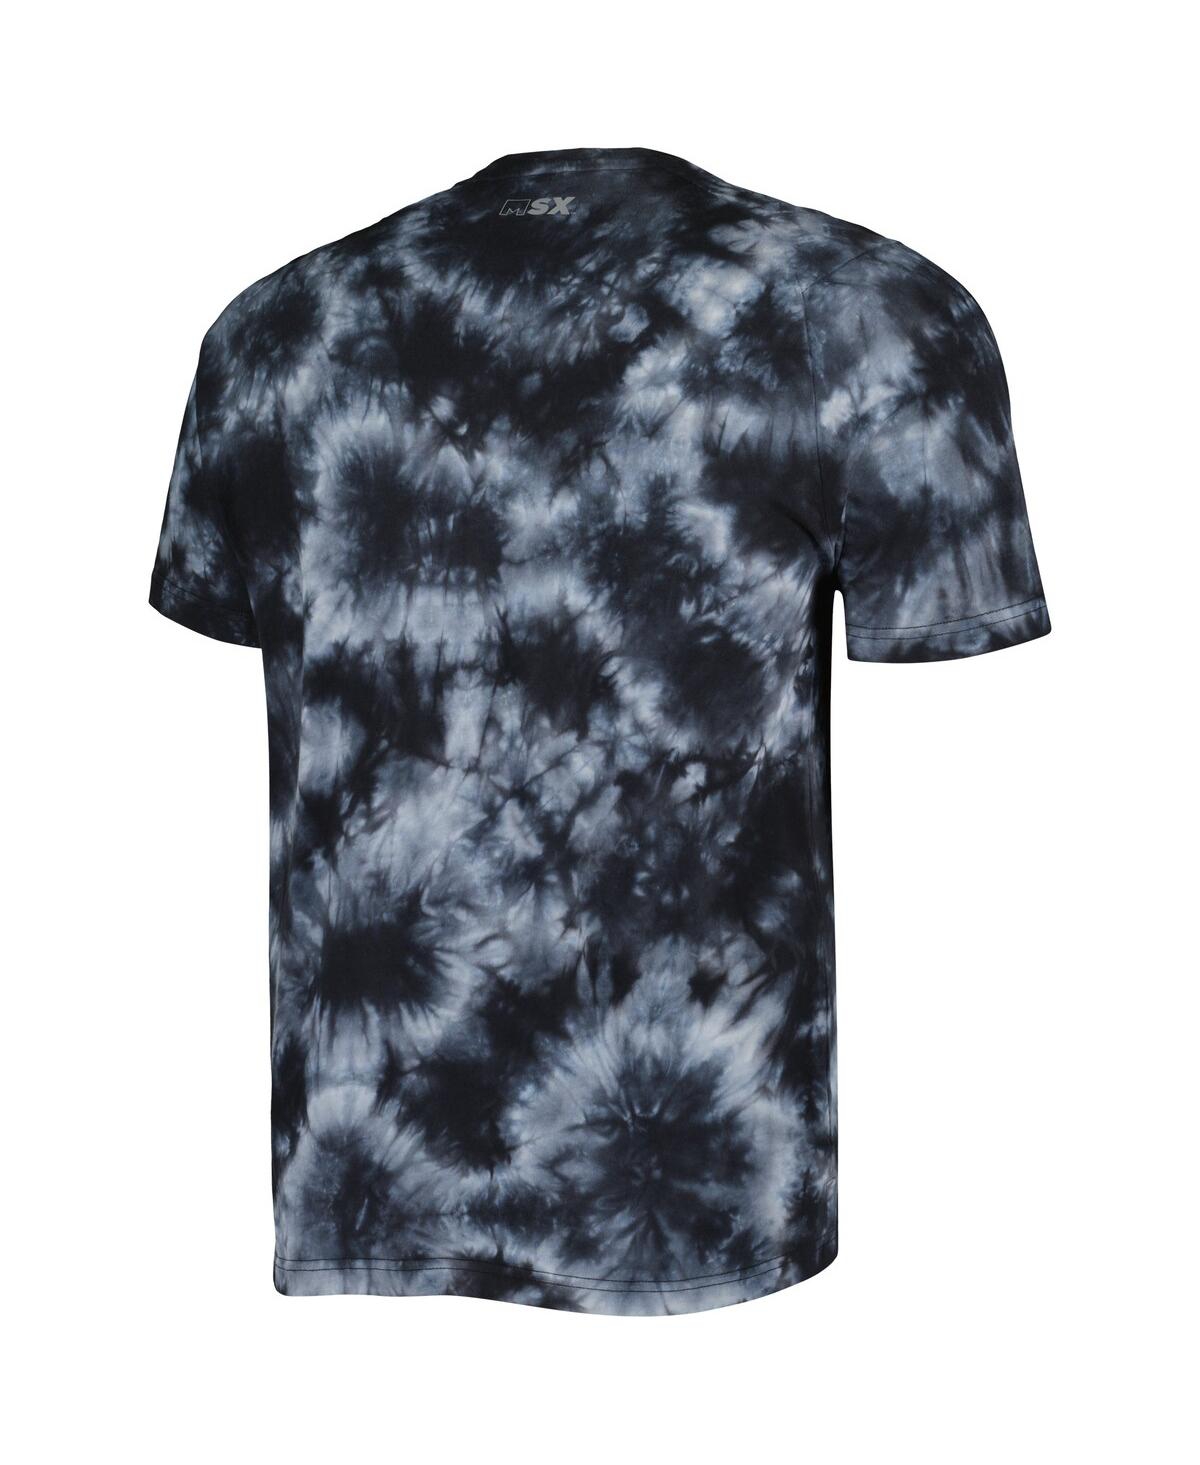 Shop Msx By Michael Strahan Men's  Black Pittsburgh Steelers Recovery Tie-dye T-shirt